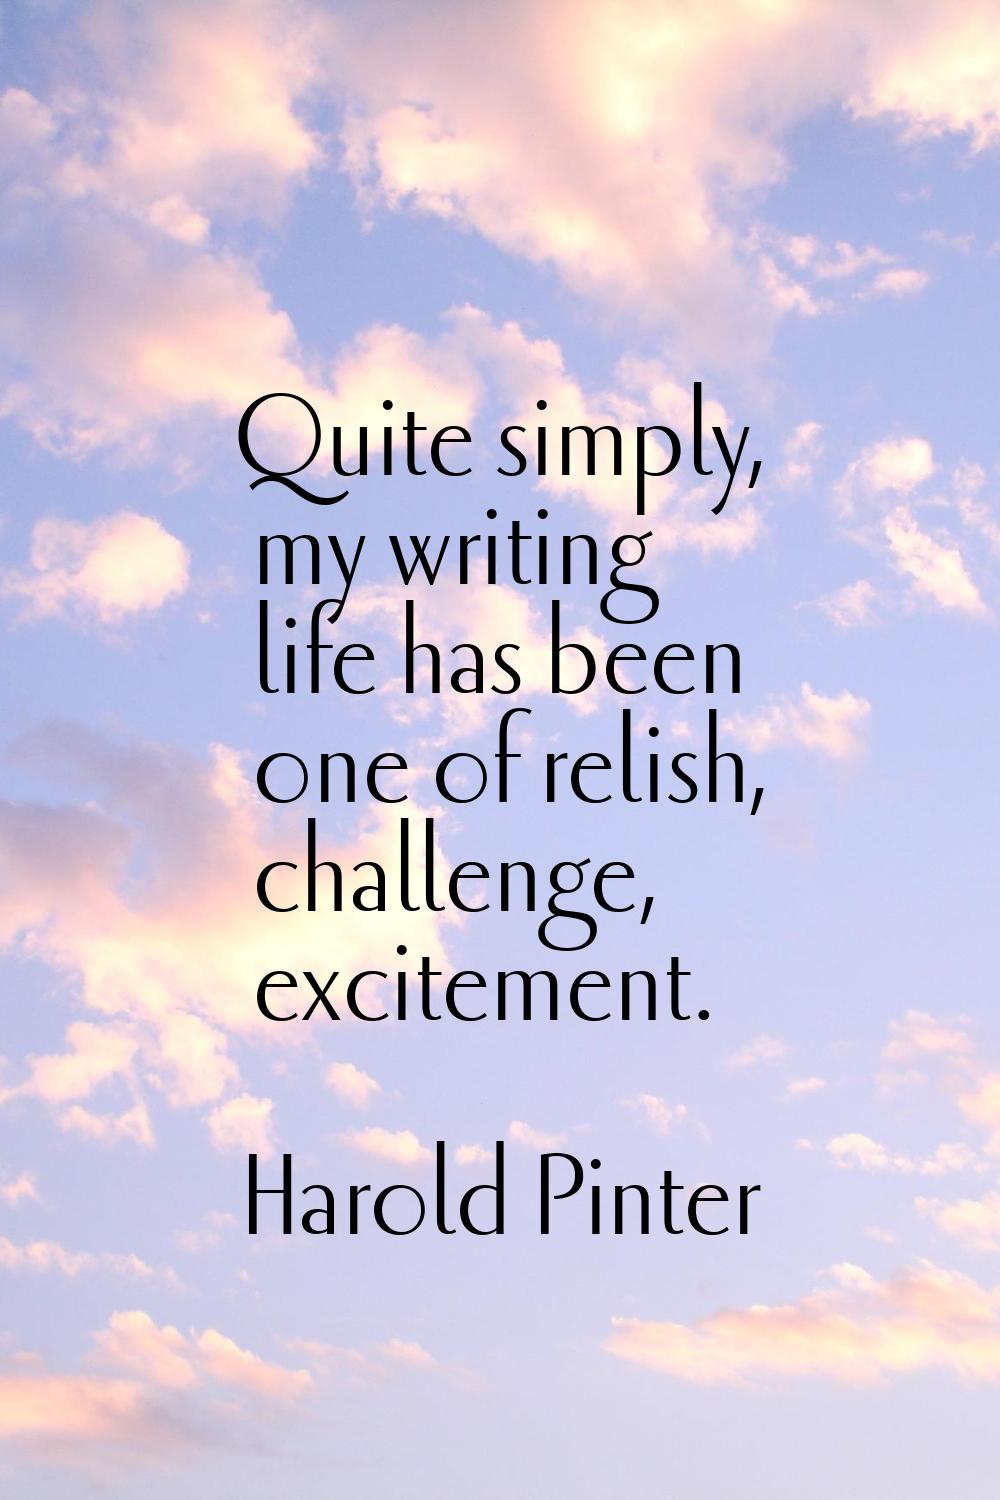 Quite simply, my writing life has been one of relish, challenge, excitement.